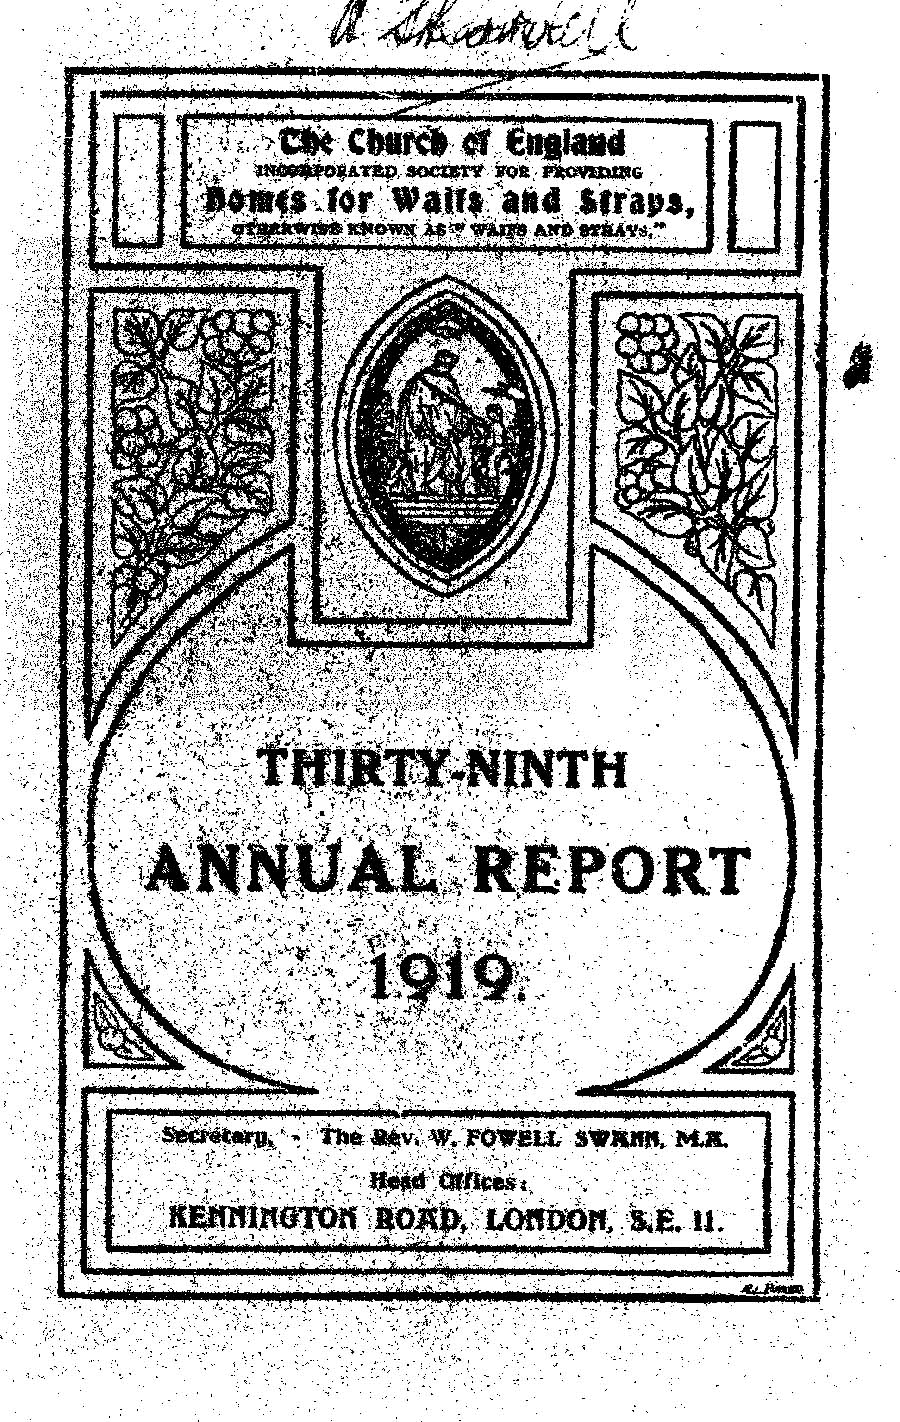 Annual Report 1919 - page 1